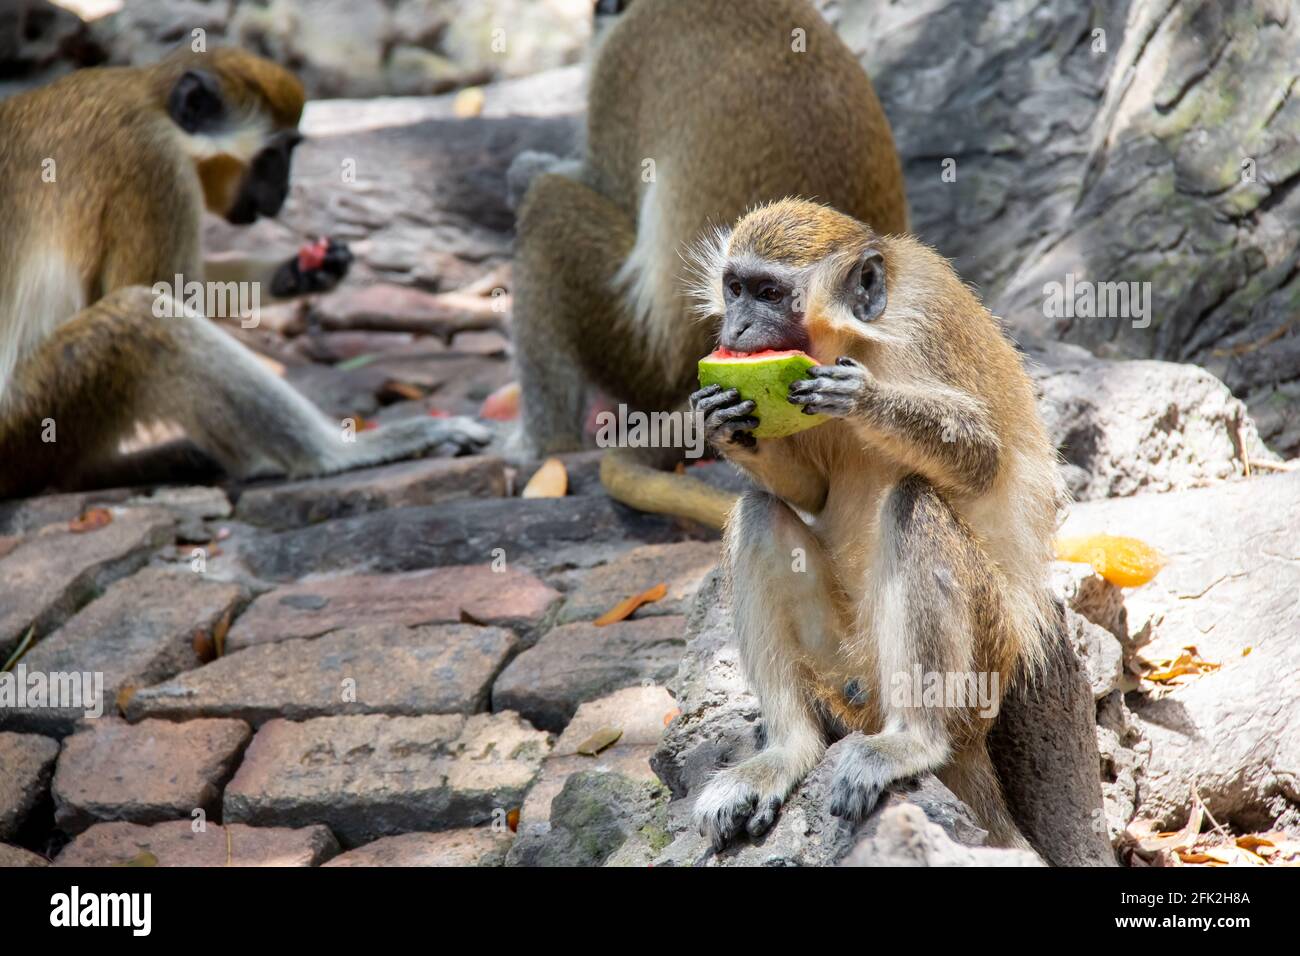 A juvenile green monkey sitting on a rock and eating fruit, a ripe slice of fresh watermelon, in Barbados, soft-focus. Stock Photo